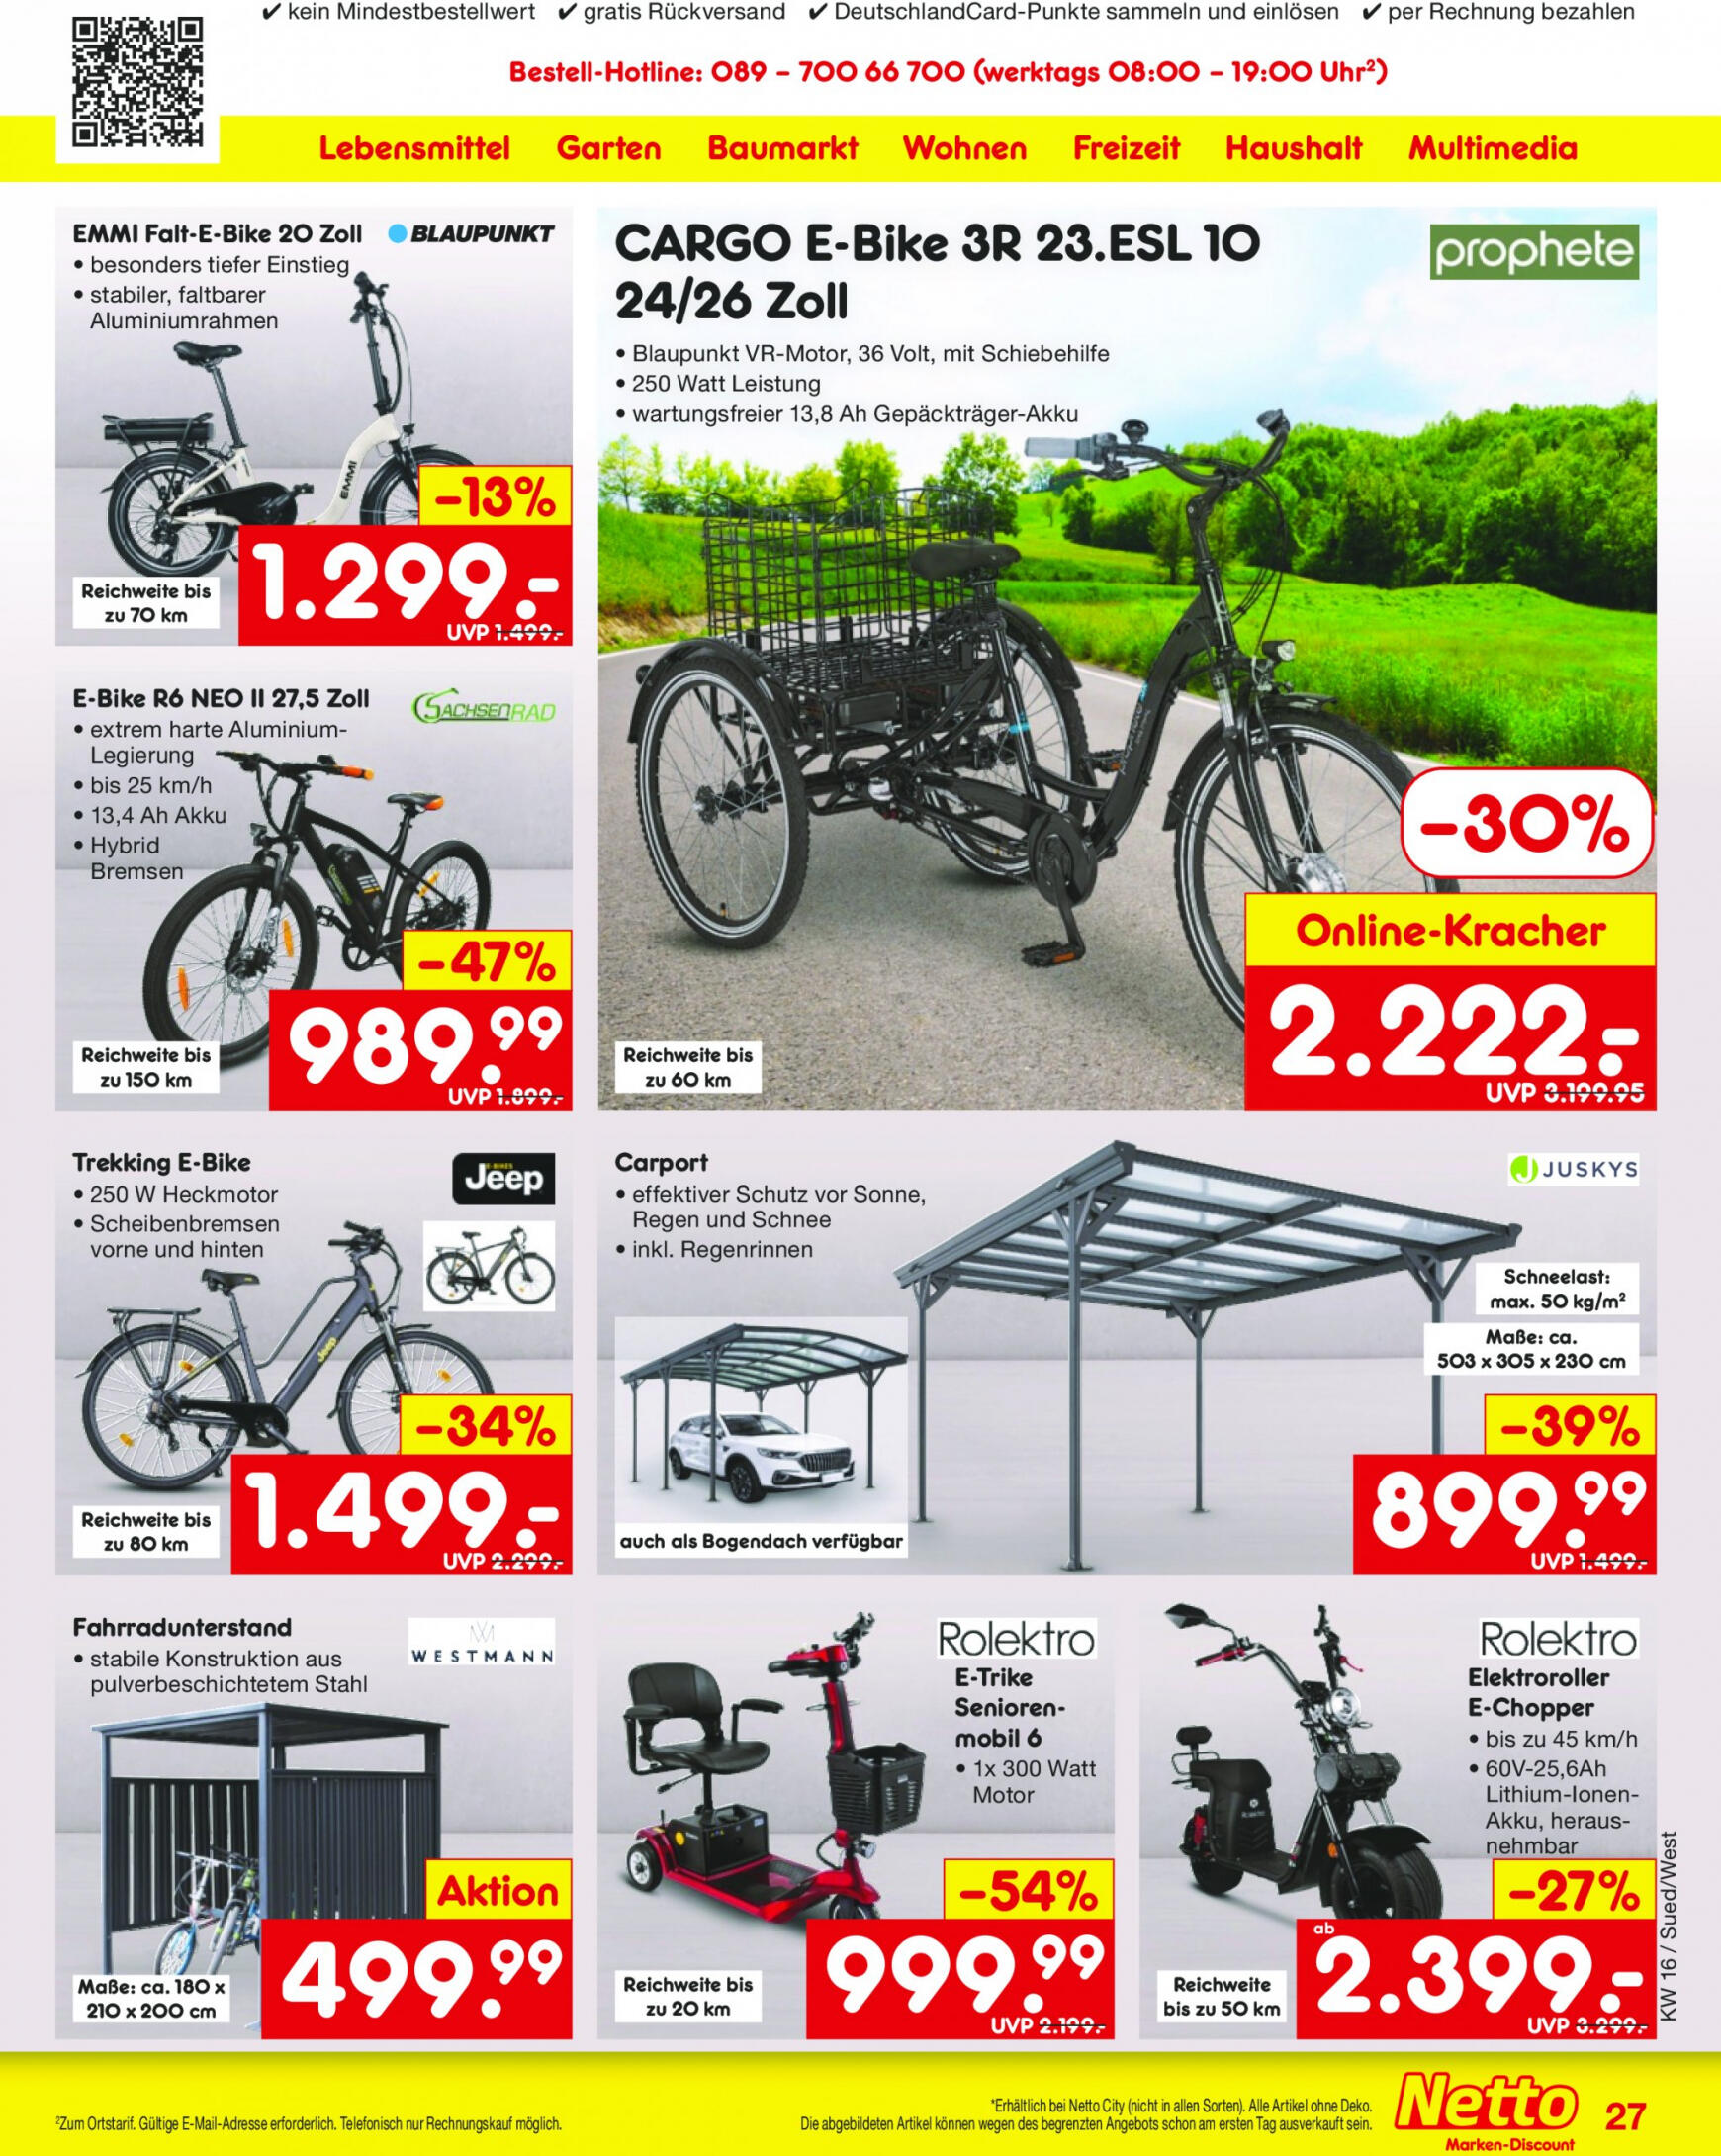 netto - Flyer Netto aktuell 15.04. - 20.04. - page: 33